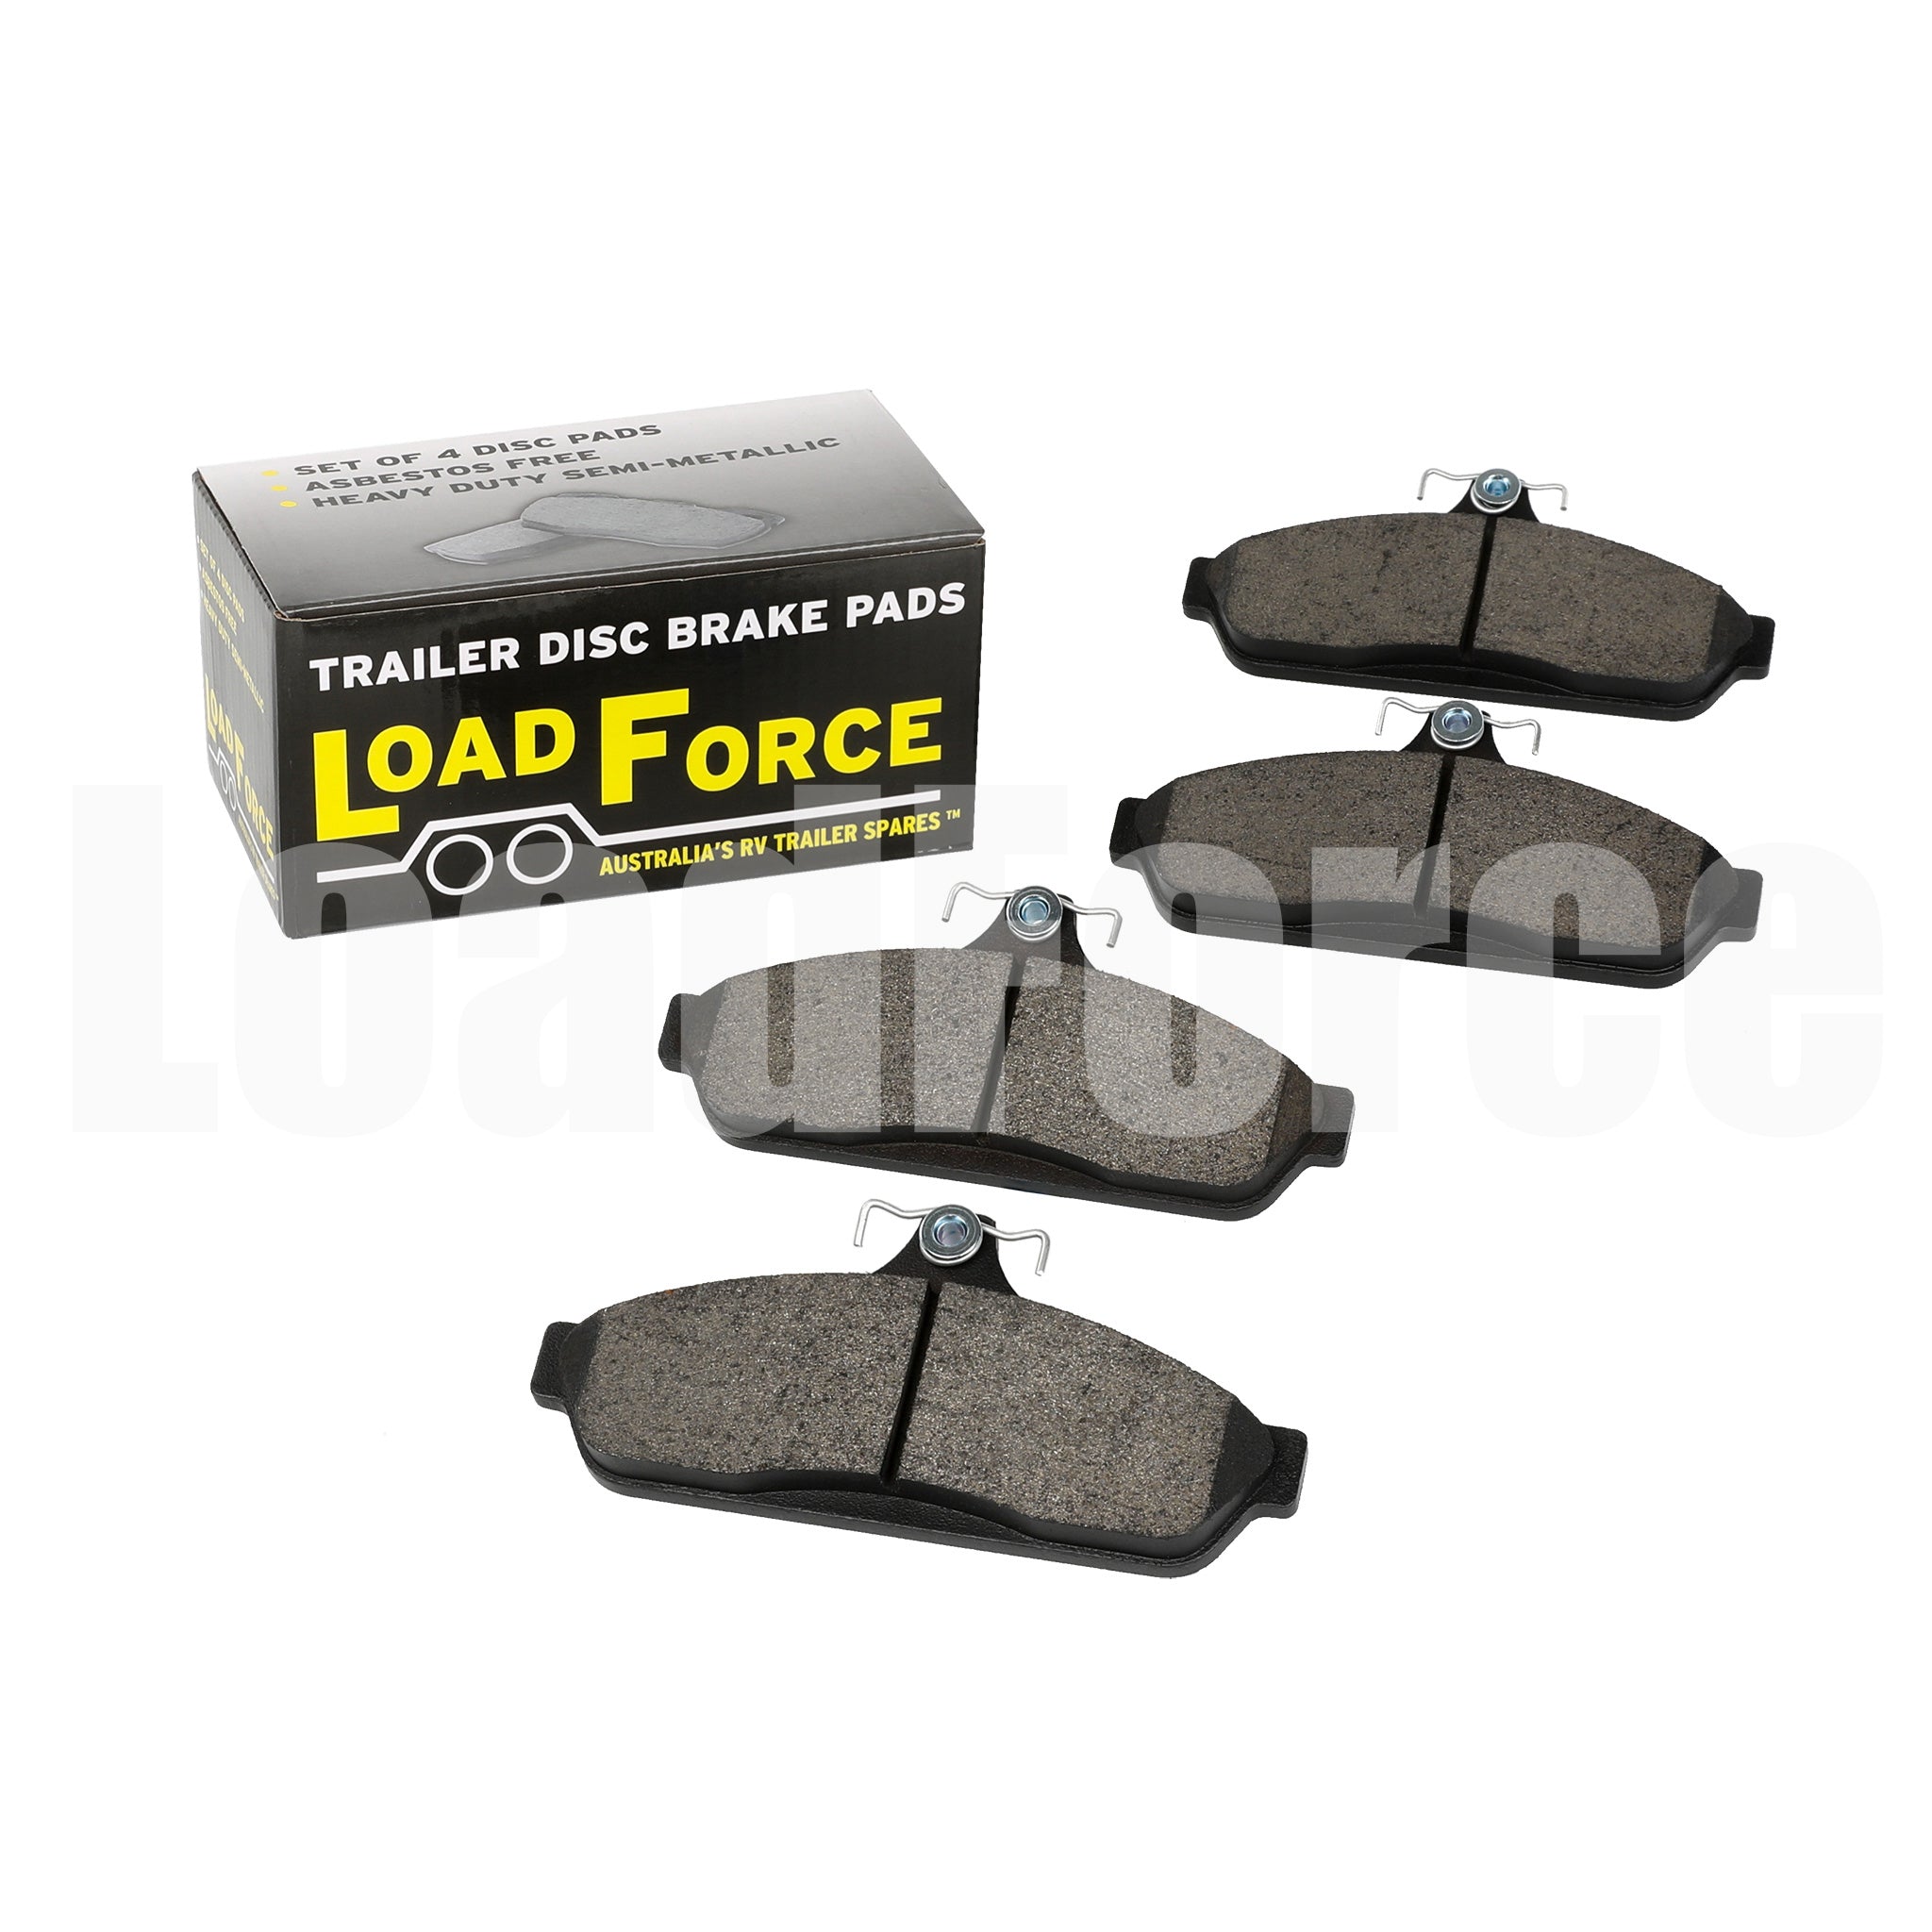 LoadForce disc brake pad for LFT2 and PBR Type 2 calipers